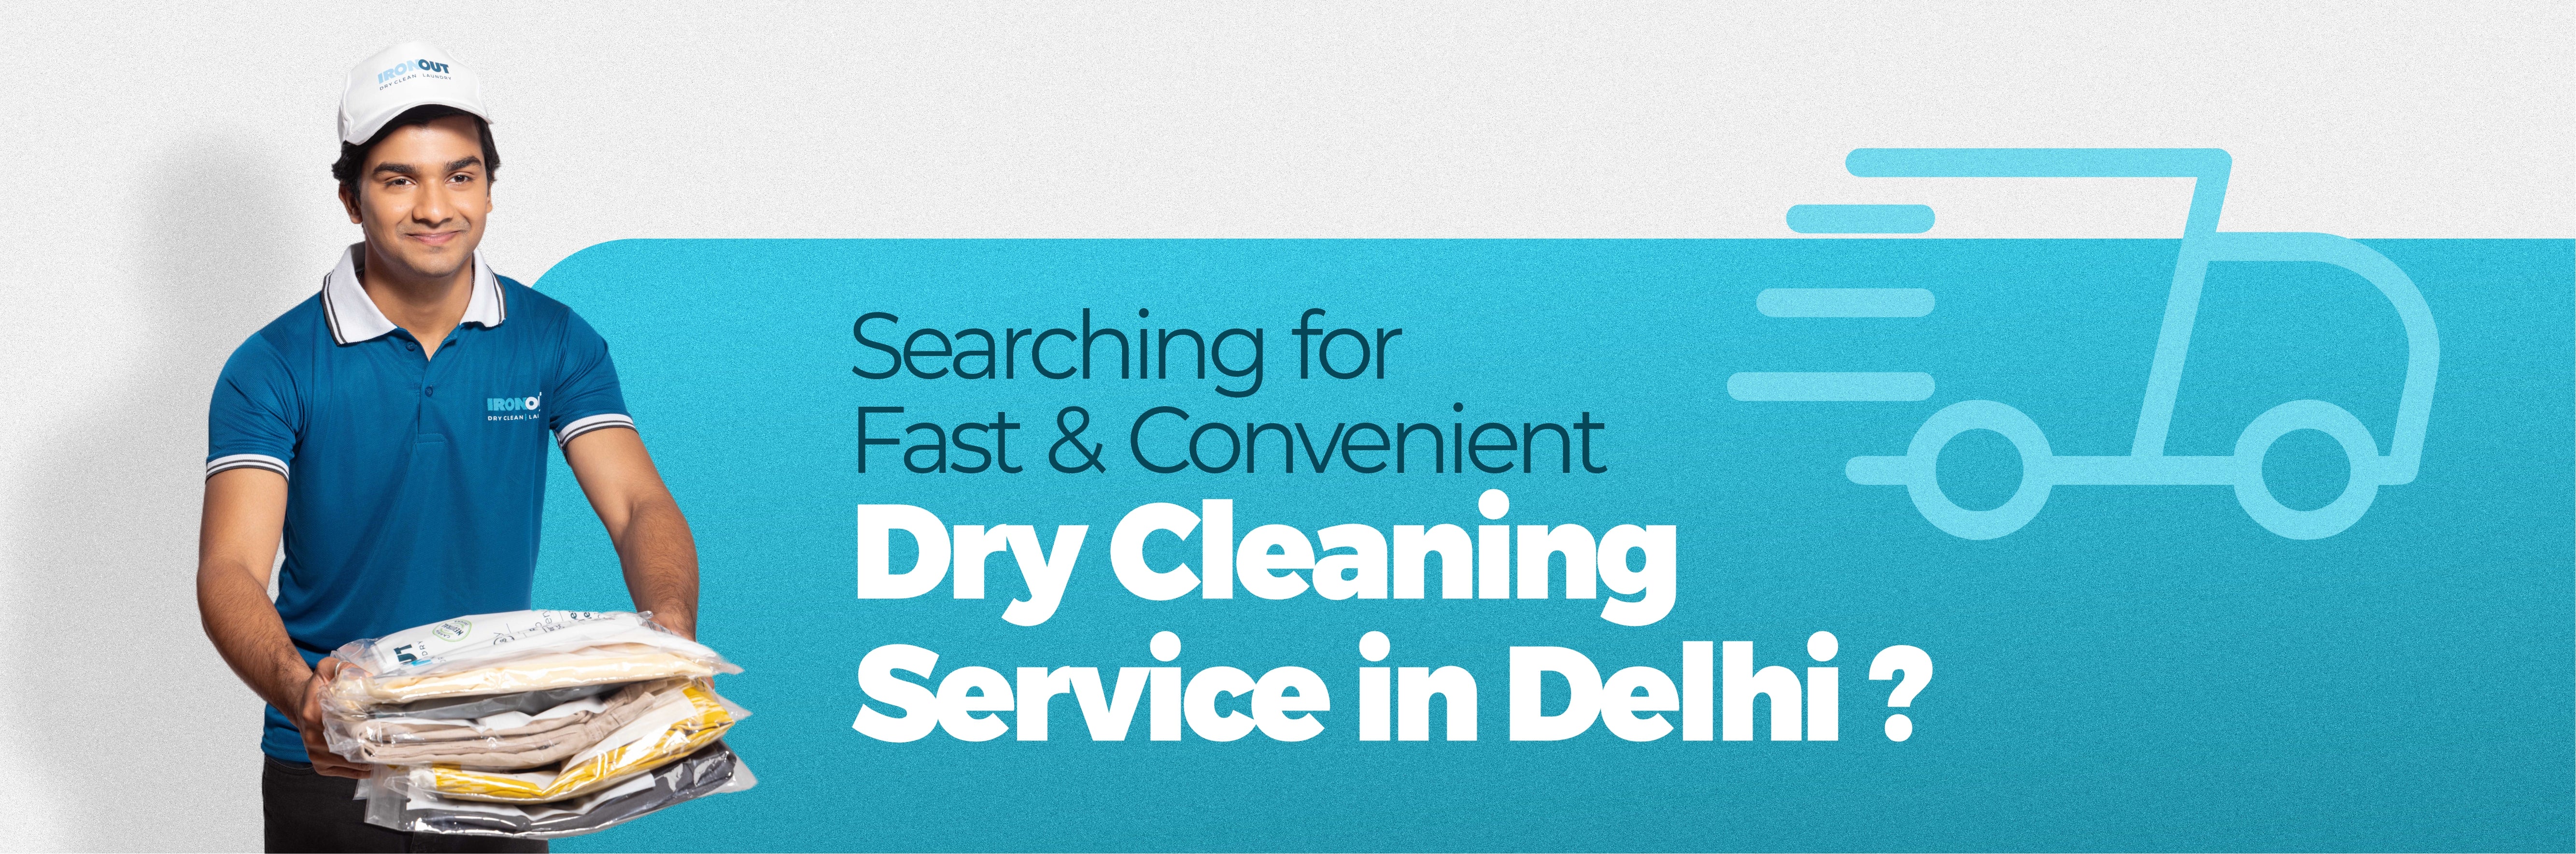 Searching for Fast & Convenient Dry Cleaning Services in Delhi